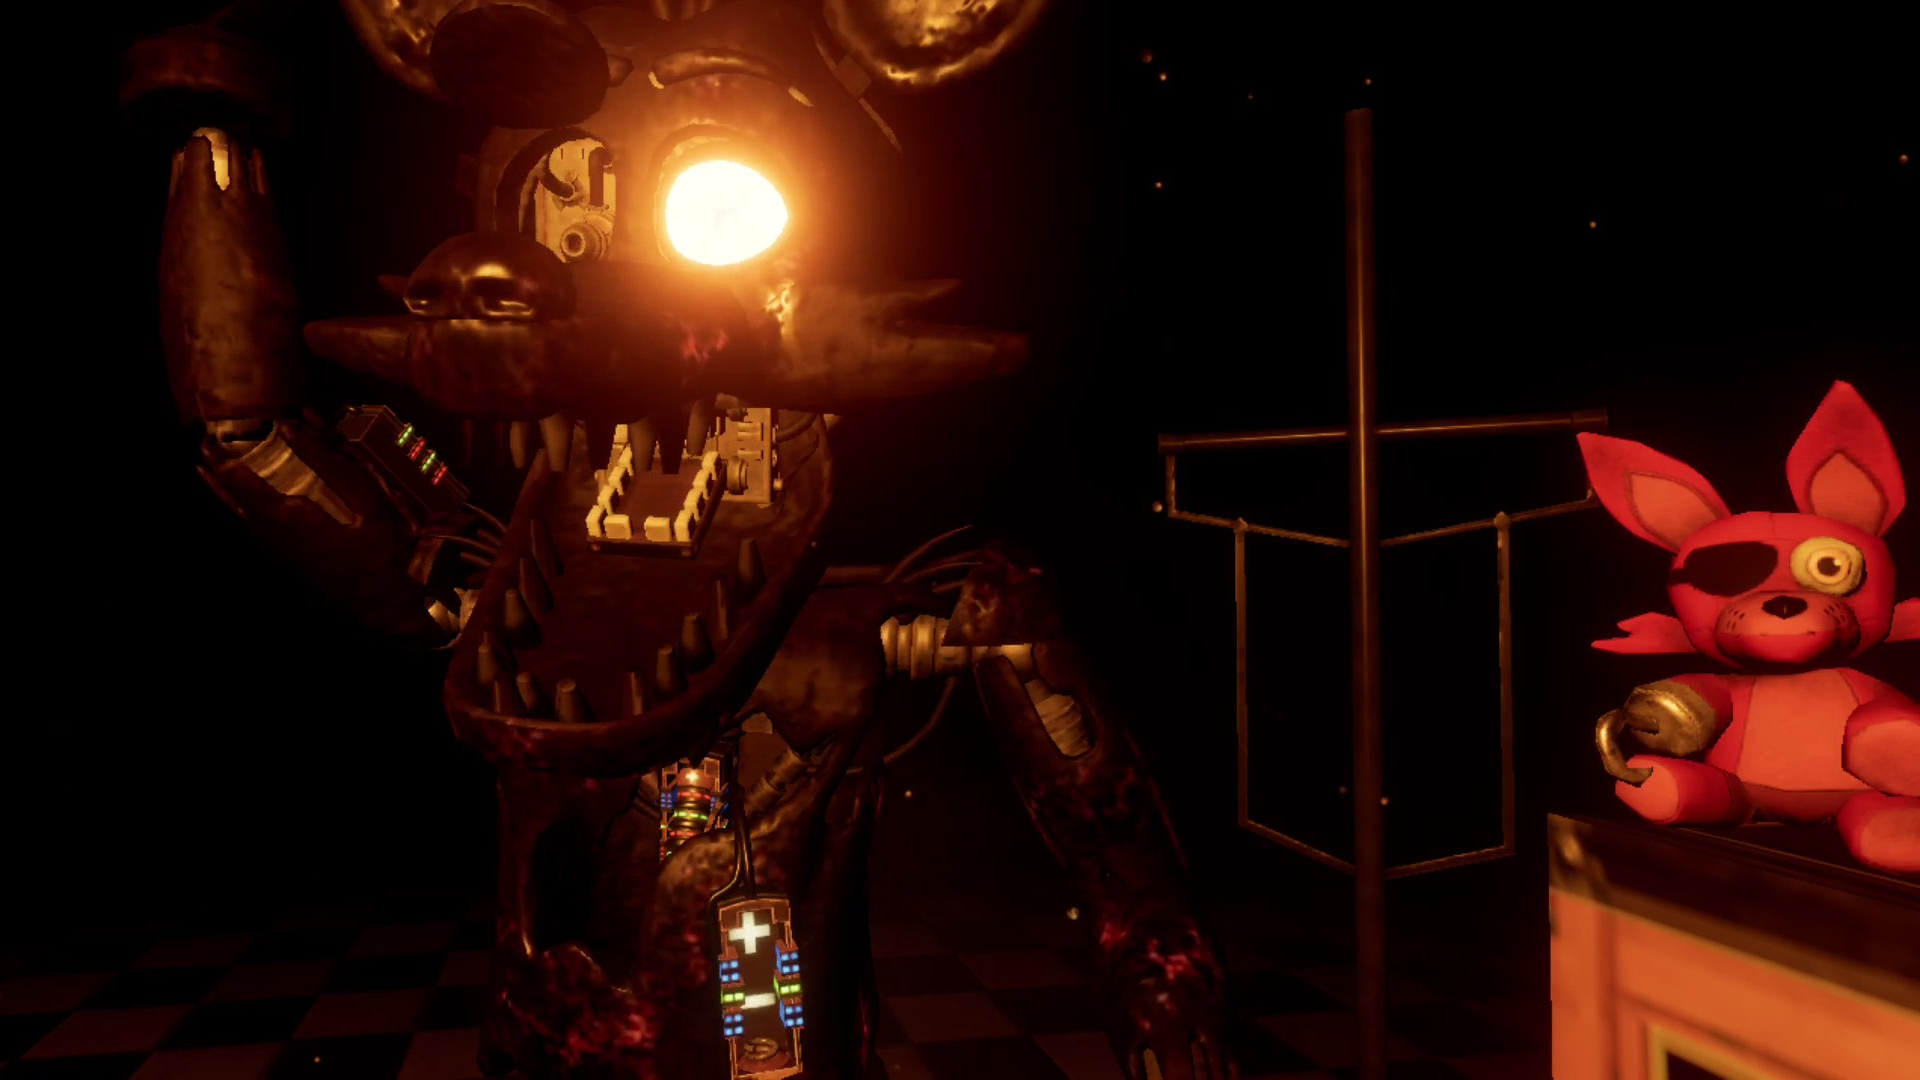 Download Five Nights at Freddy's: HW APK Full v1.0 b54 for Android